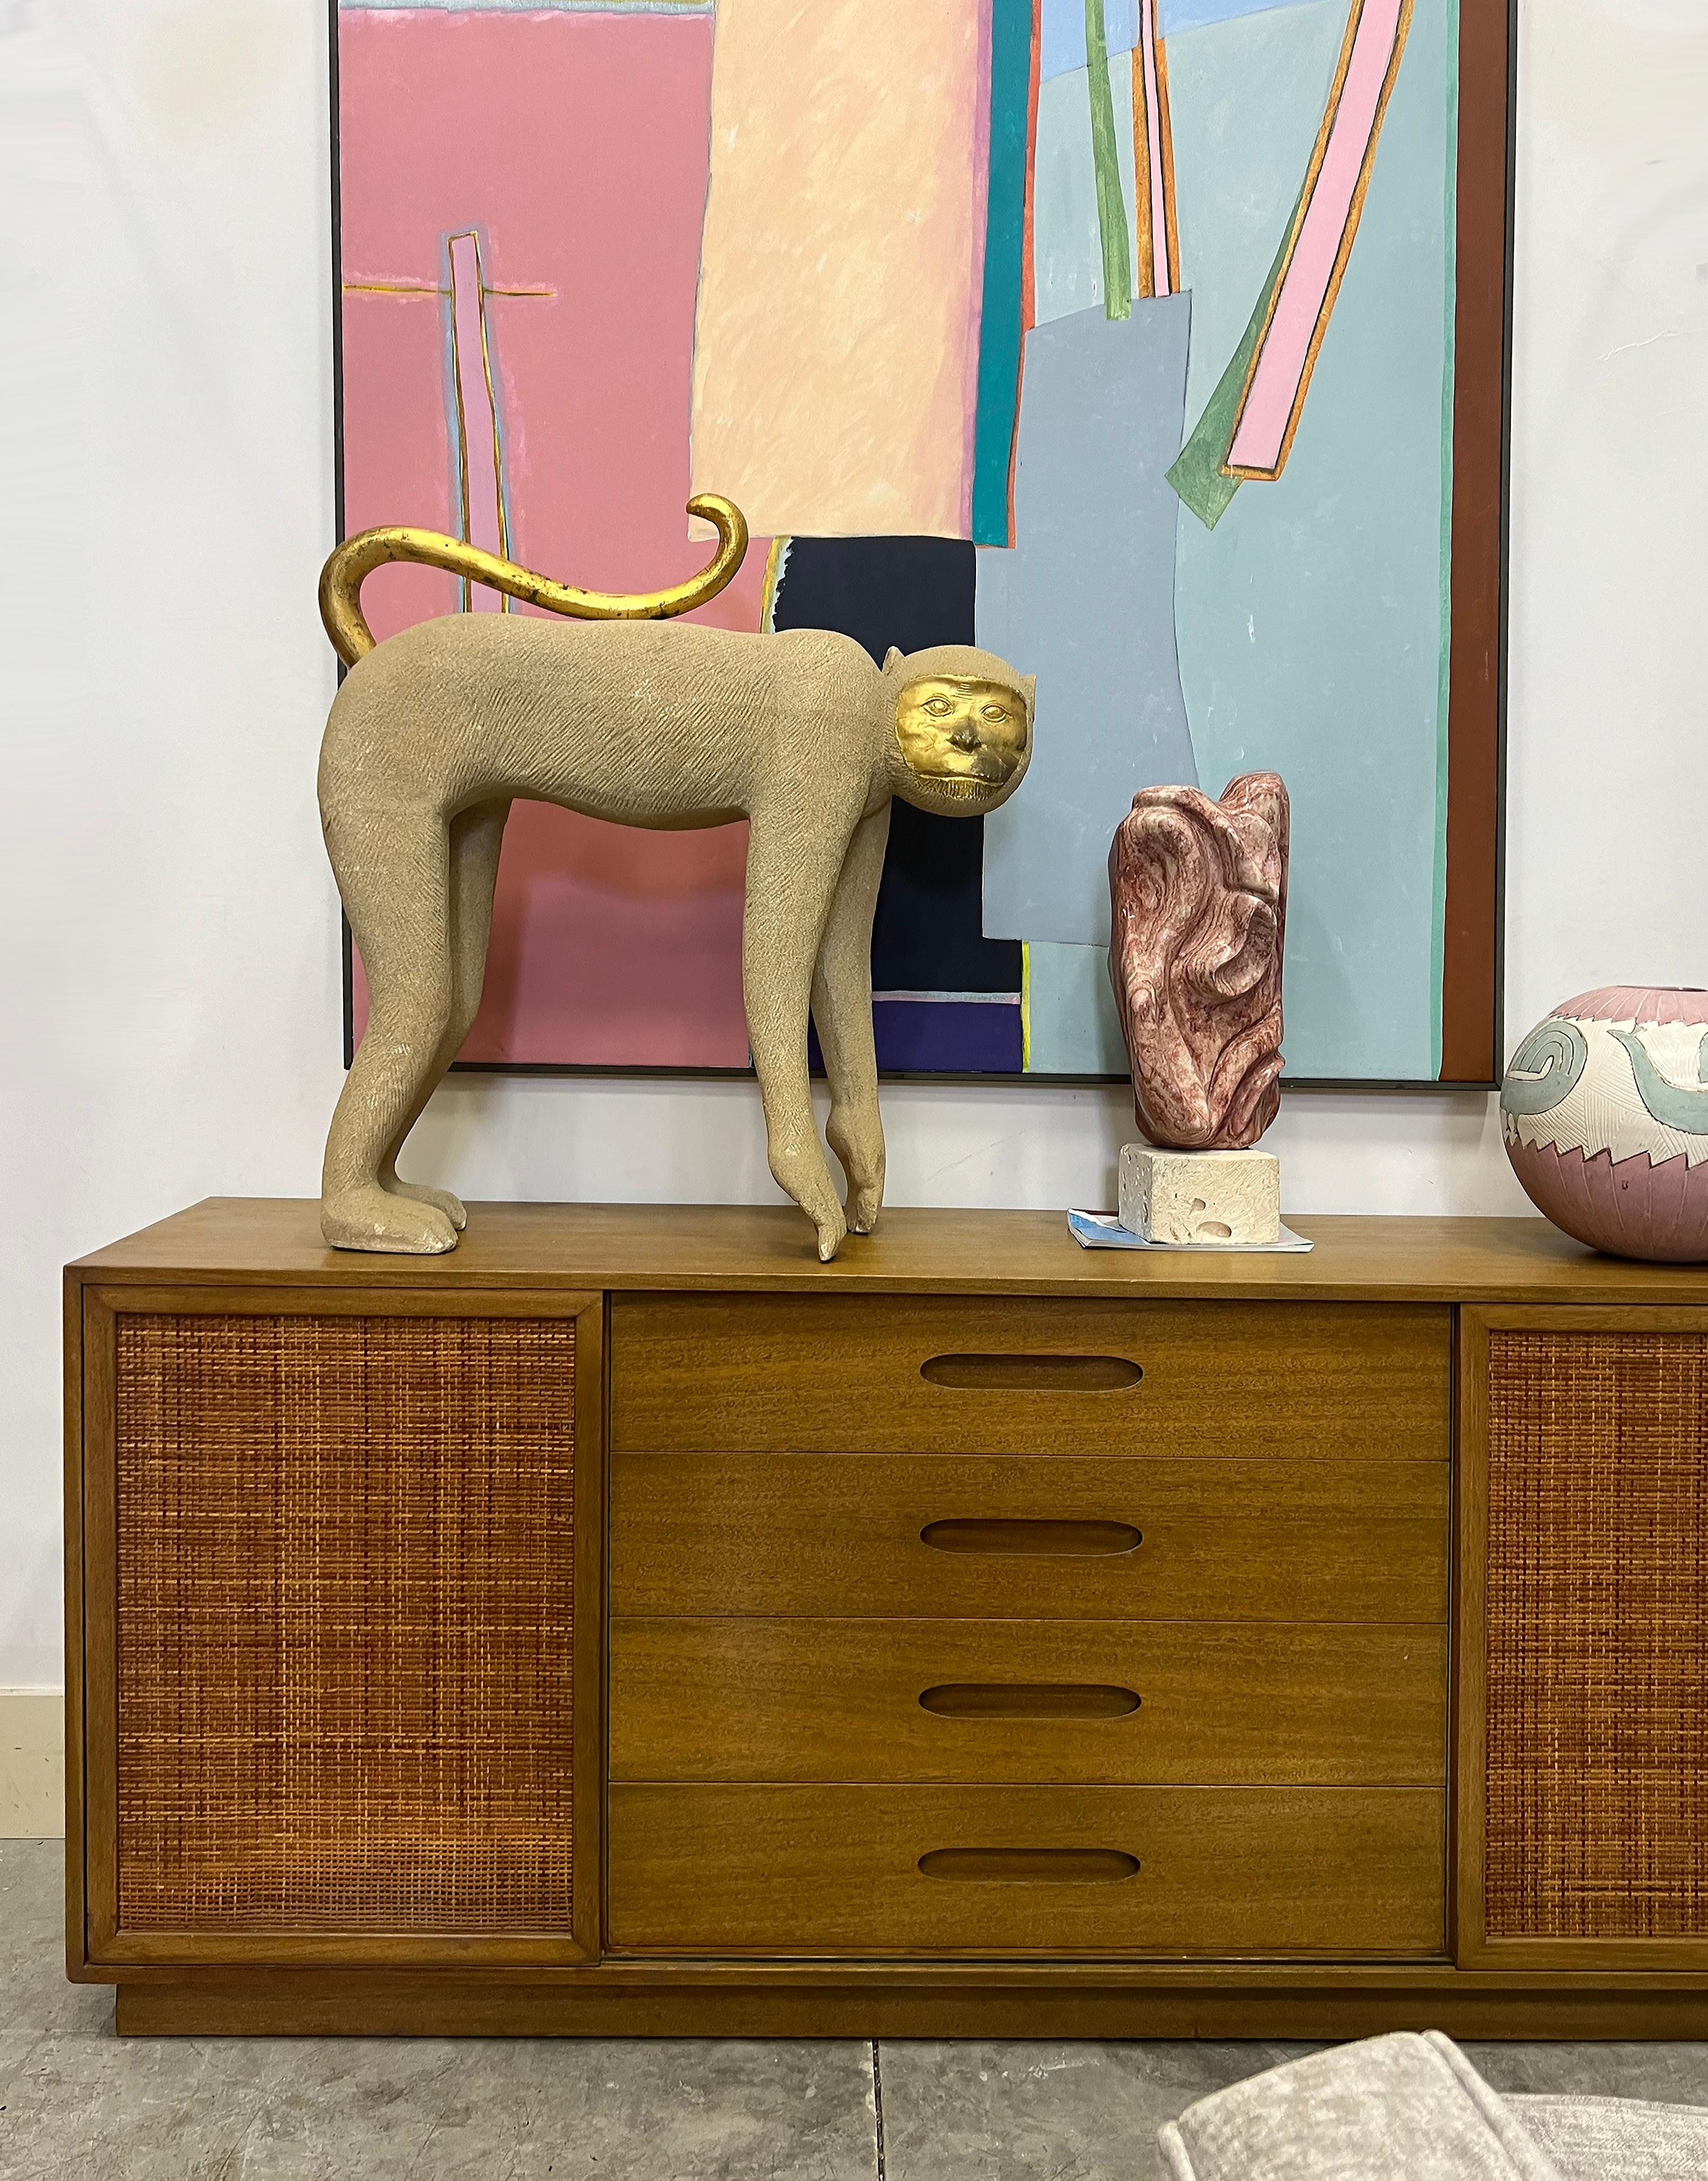 Life Size 1980s Pop-Art Monkey Sculpture With Gilt Accents


Offered for sale is a life-size monkey sculpture created in the Pop-Art style of the 1980s. The sculpture inches in height is to the top of the tail with the tail positioned upward. The